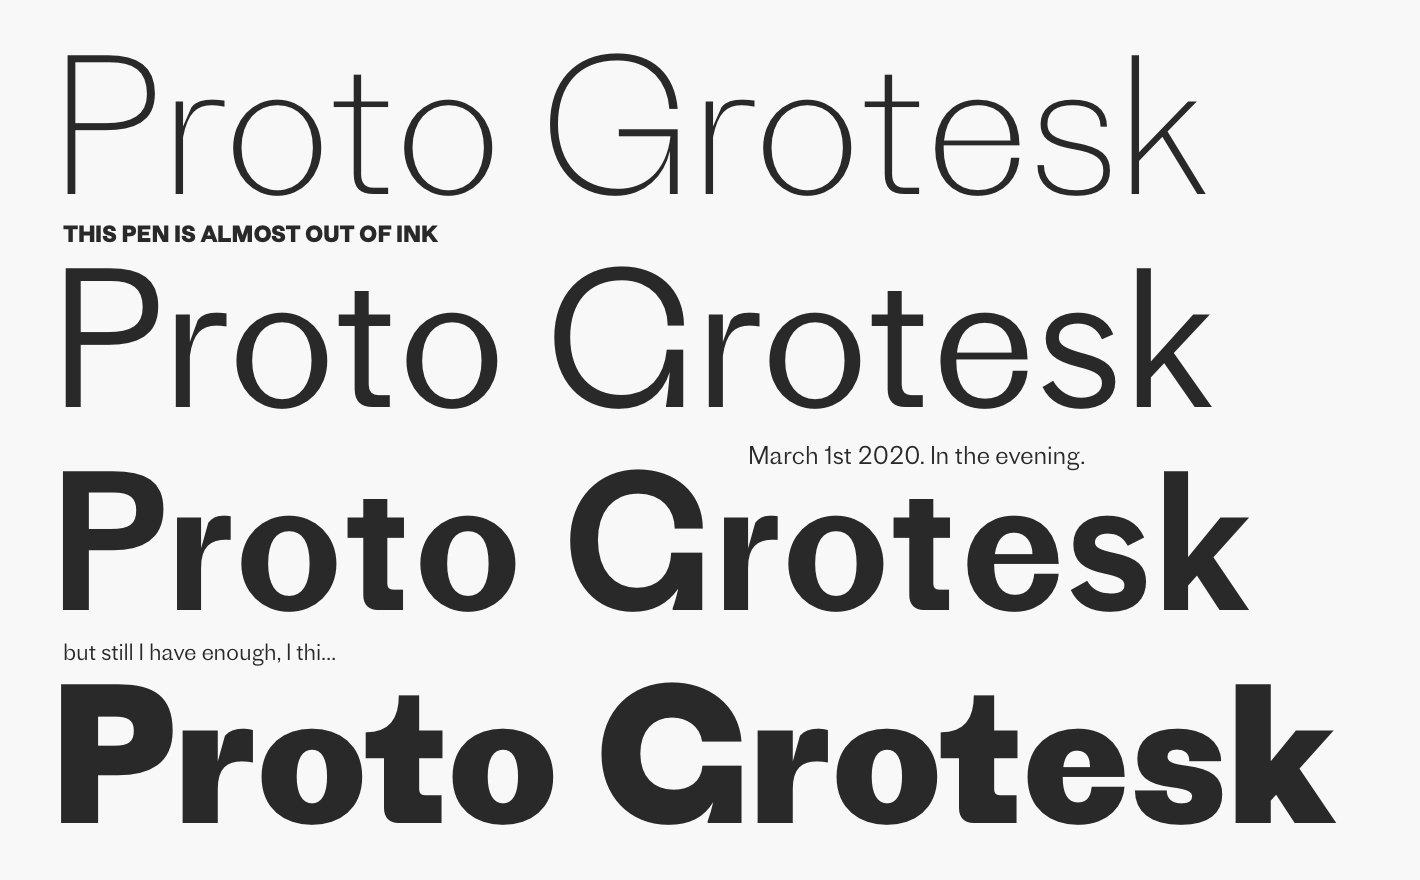 A sampling of Proto Grotesk in various weights and sizes